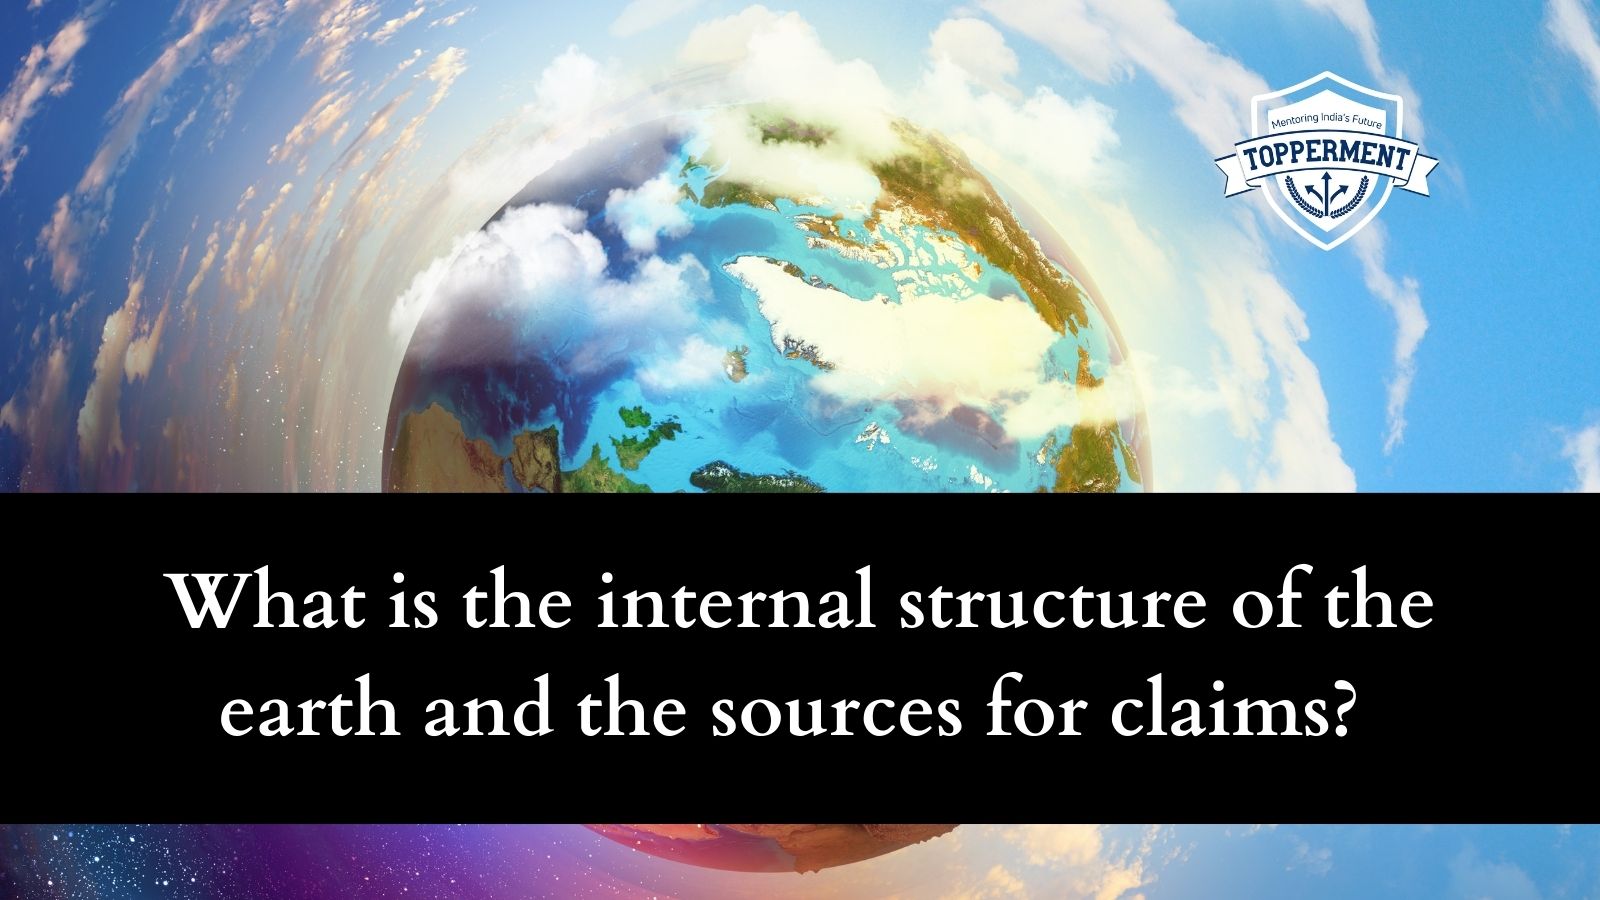 What is the internal structure of the earth and the sources for claims? | Best UPSC IAS Coaching For Mentorship And Guidance